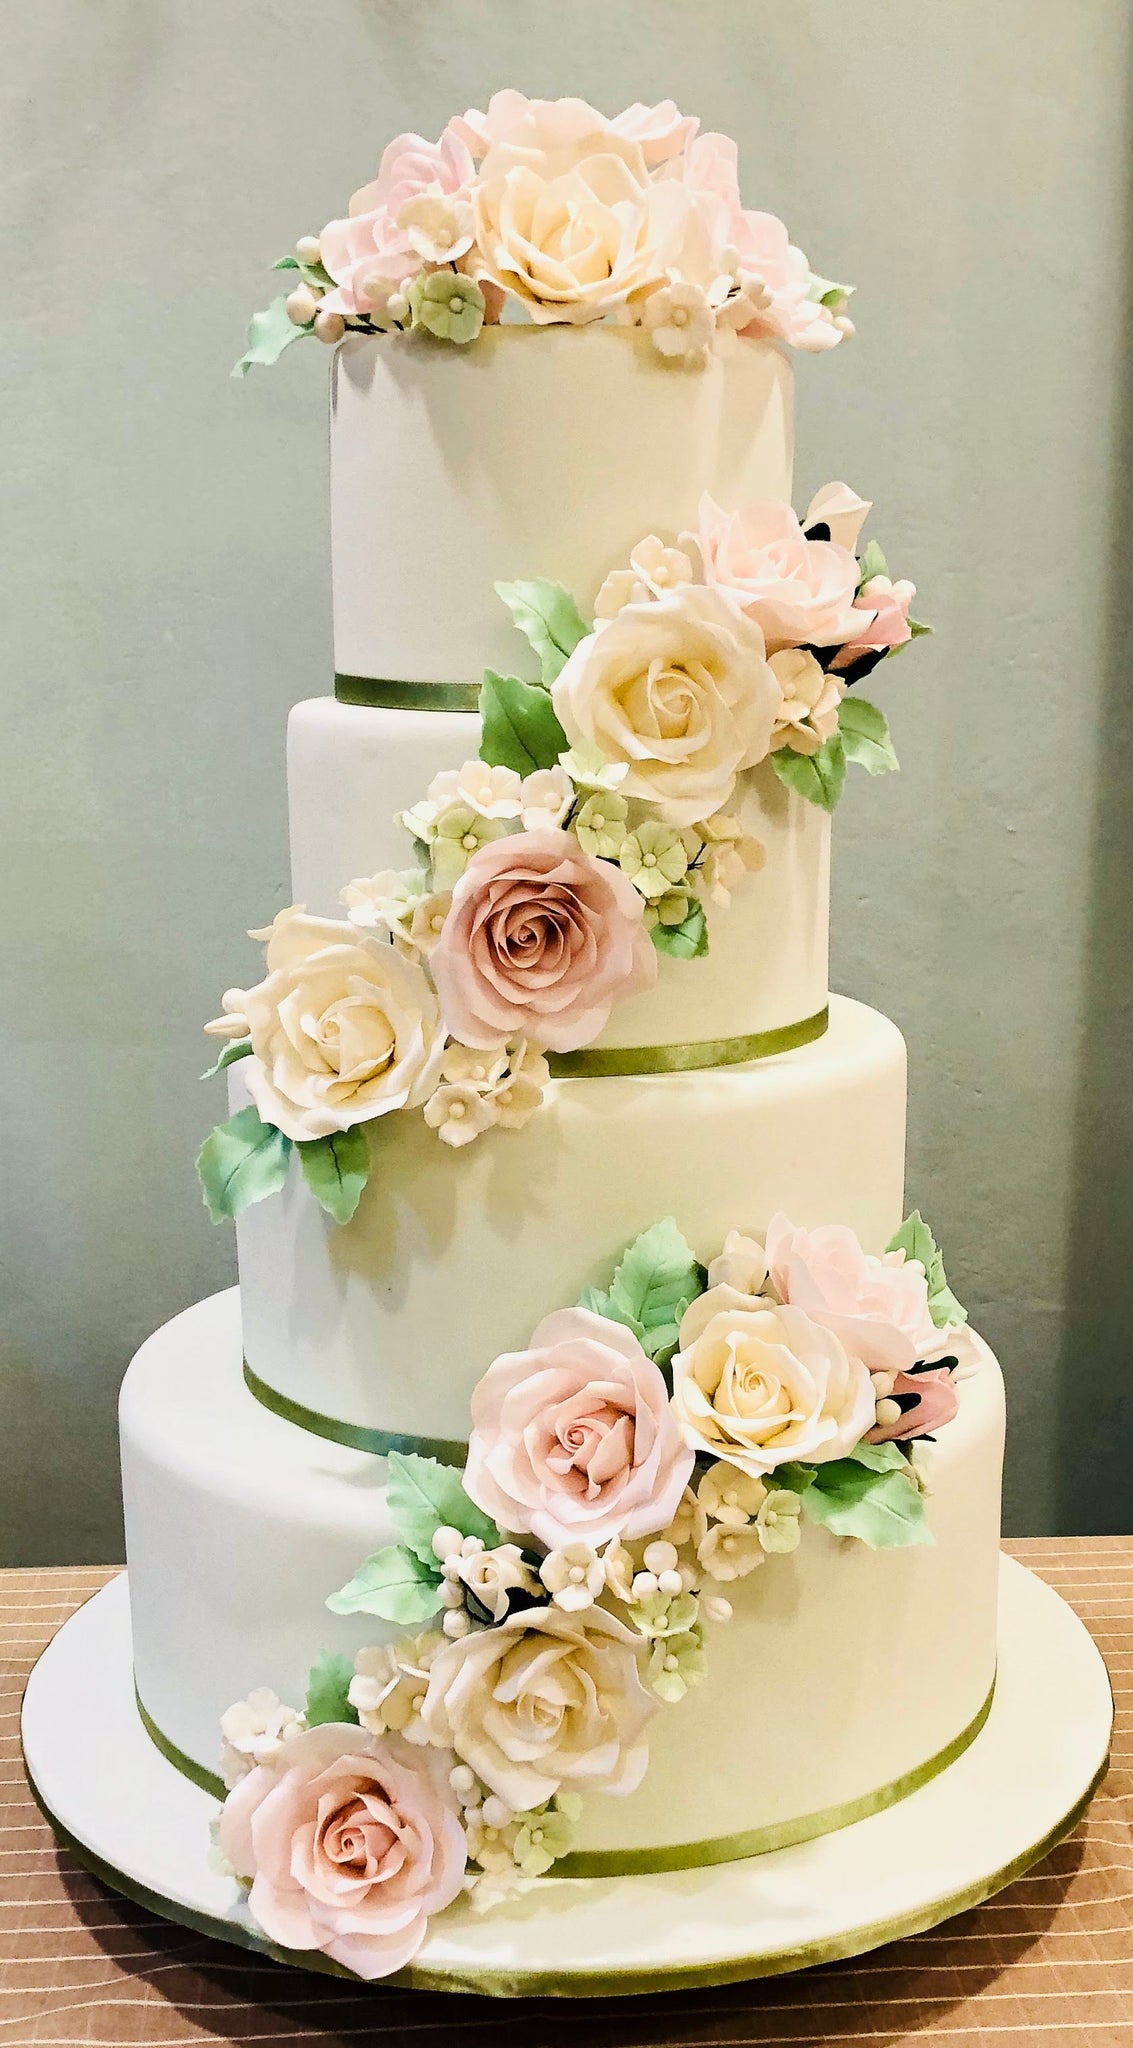 How To Make Your Own Wedding Cake - Chelsweets